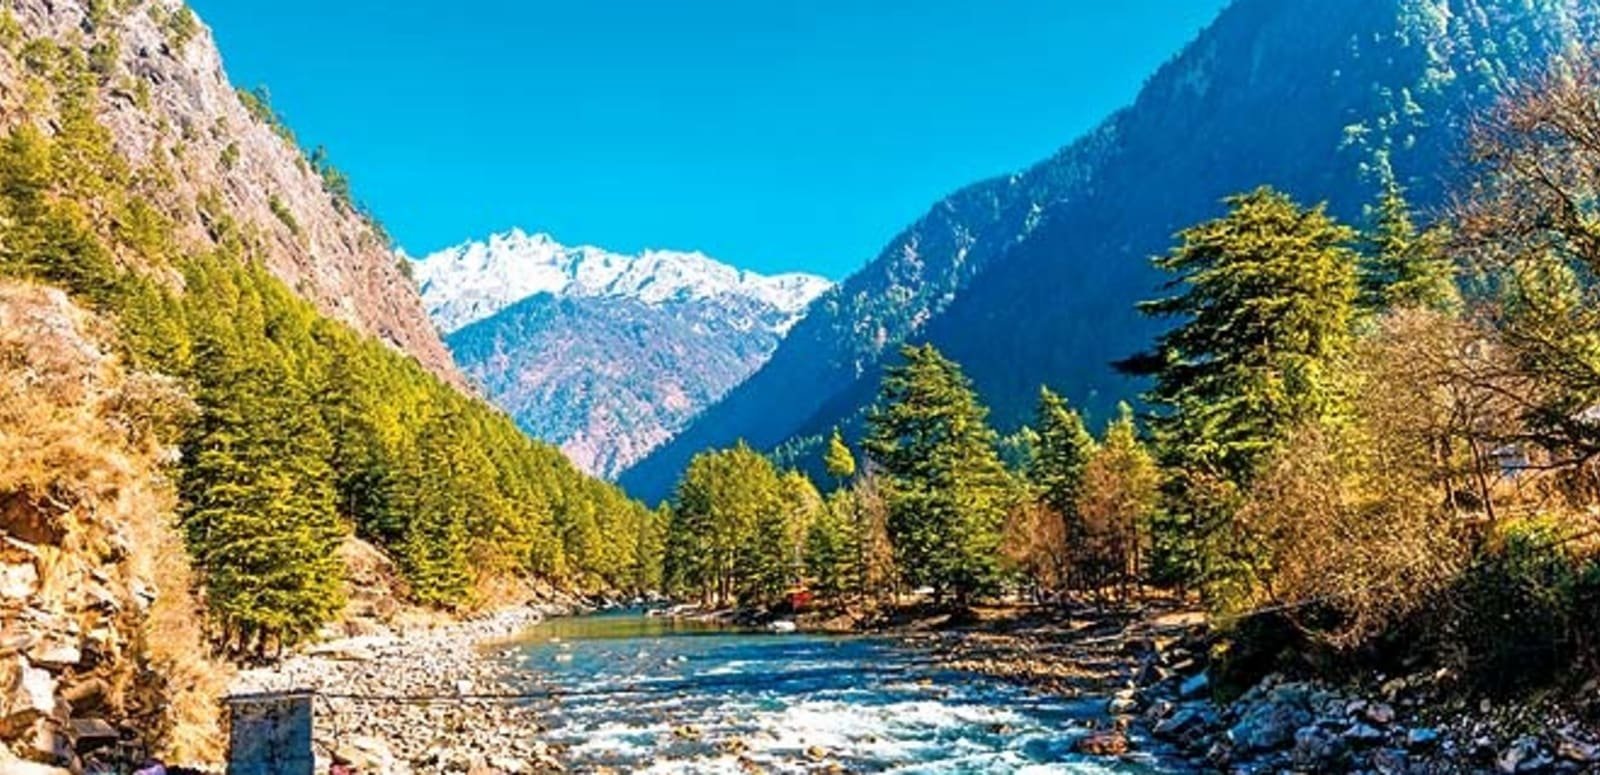 Day 06: Proceed from Manali to Kasol (80 km-03 hours)